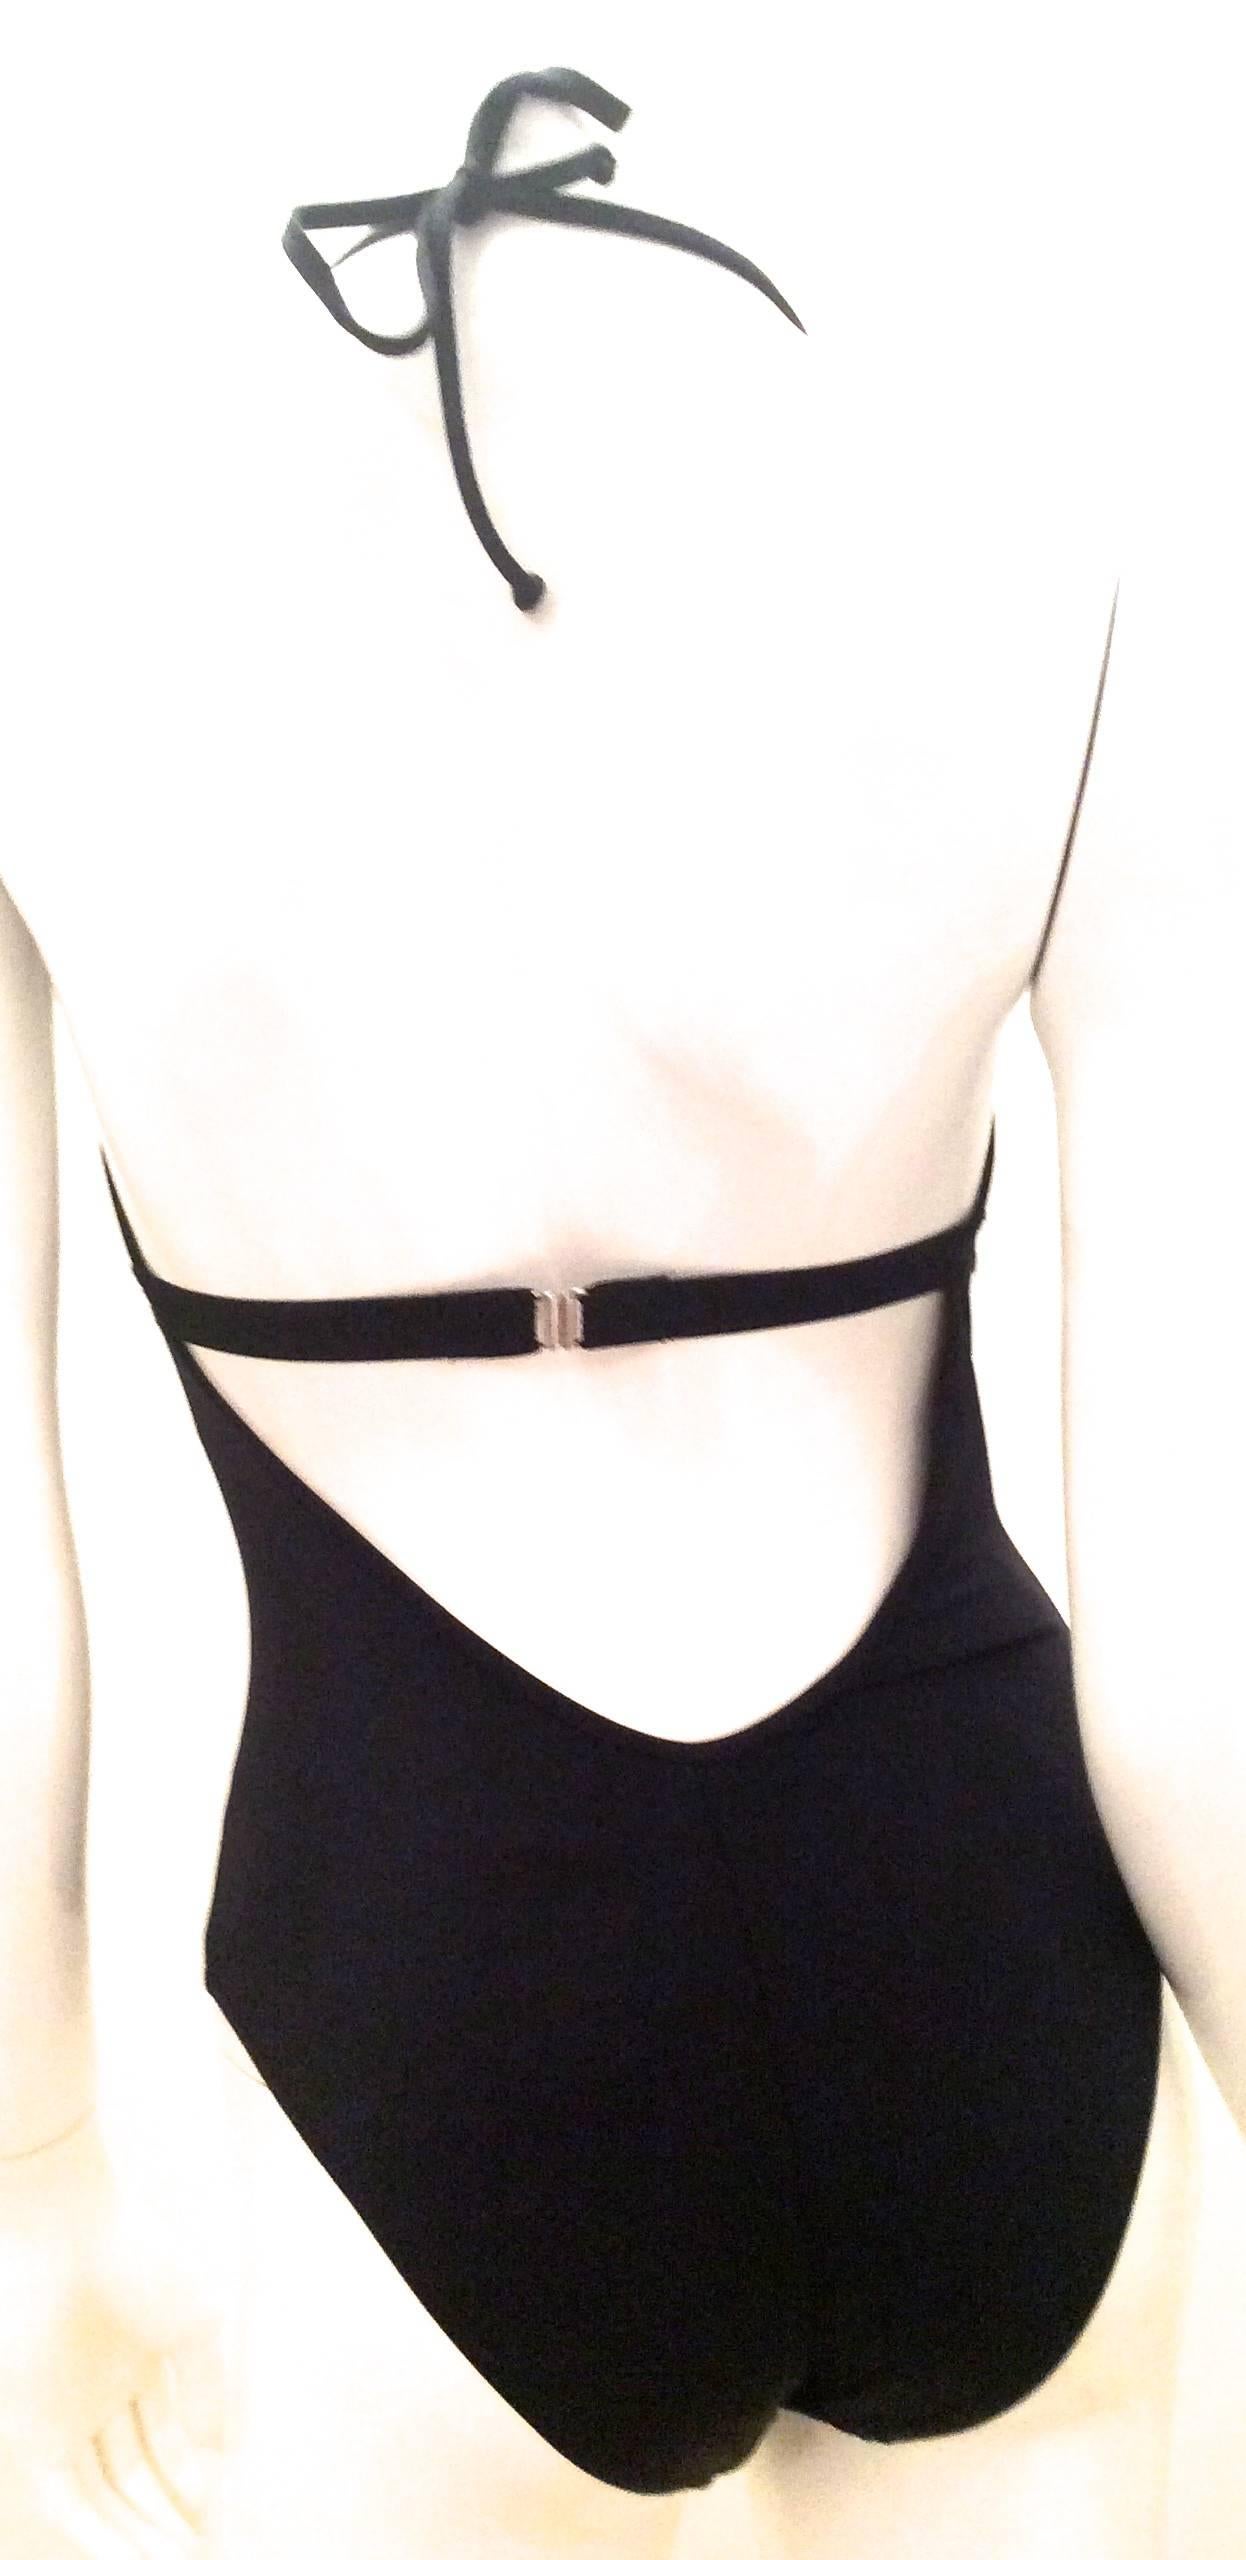 Presented here is a black Moschino swimsuit. There is an elastic band below the breasts suit for support. The back of the swimsuit is cut low to allow the back to be displayed nicely. Through the opening on the back, there is a singular elastic